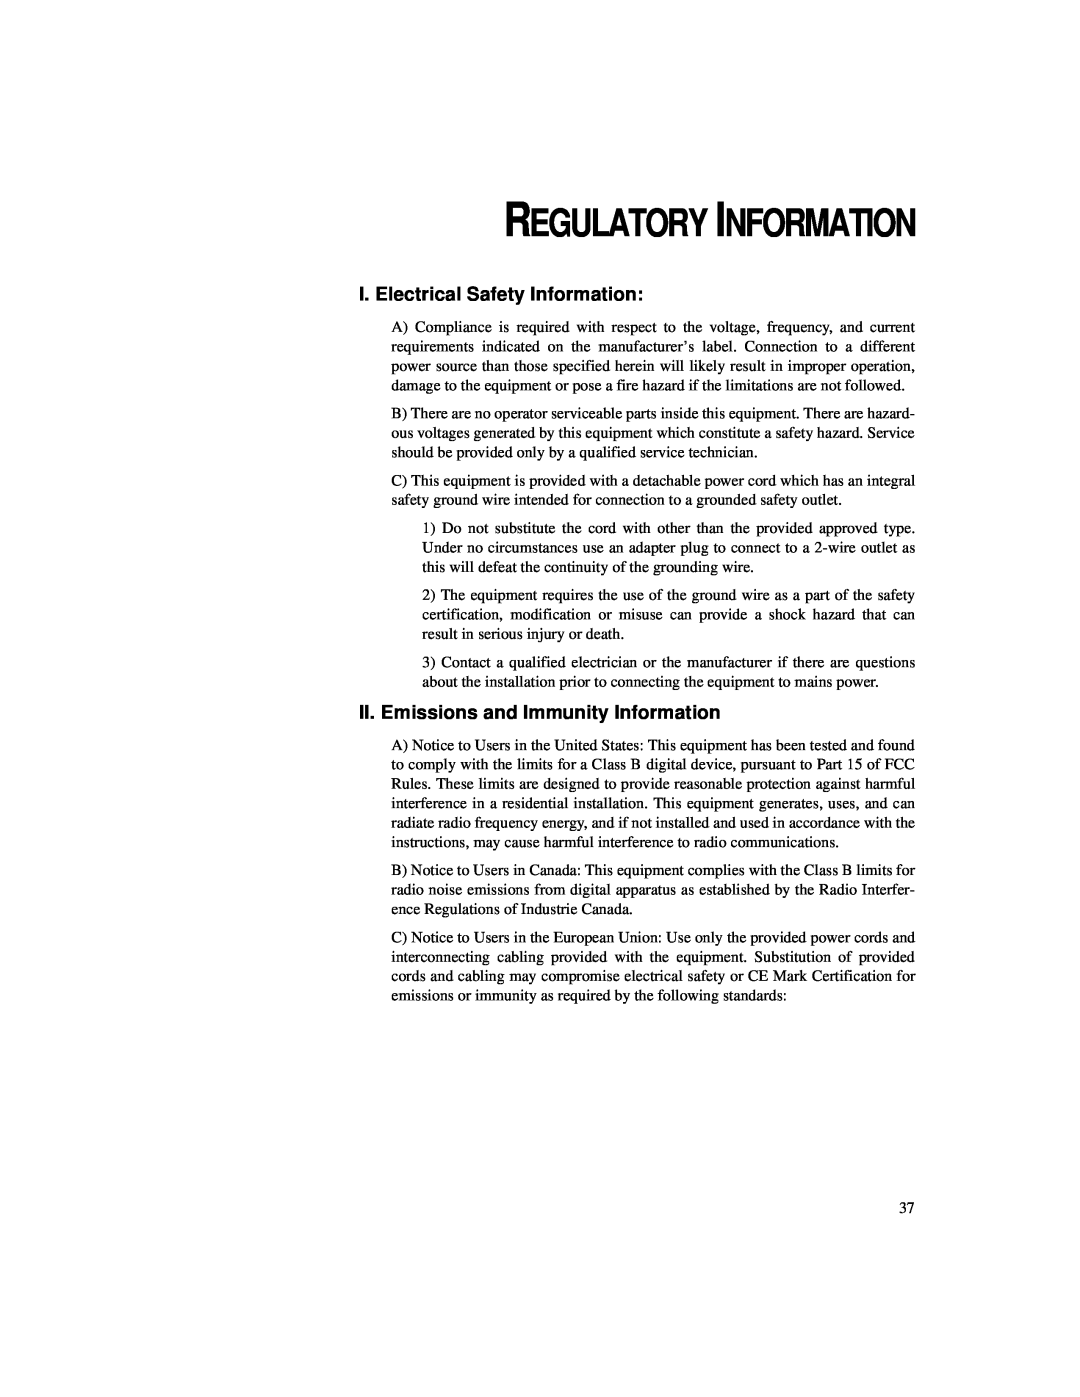 Elo TouchSystems 1827L Regulatory Information, I. Electrical Safety Information, II. Emissions and Immunity Information 